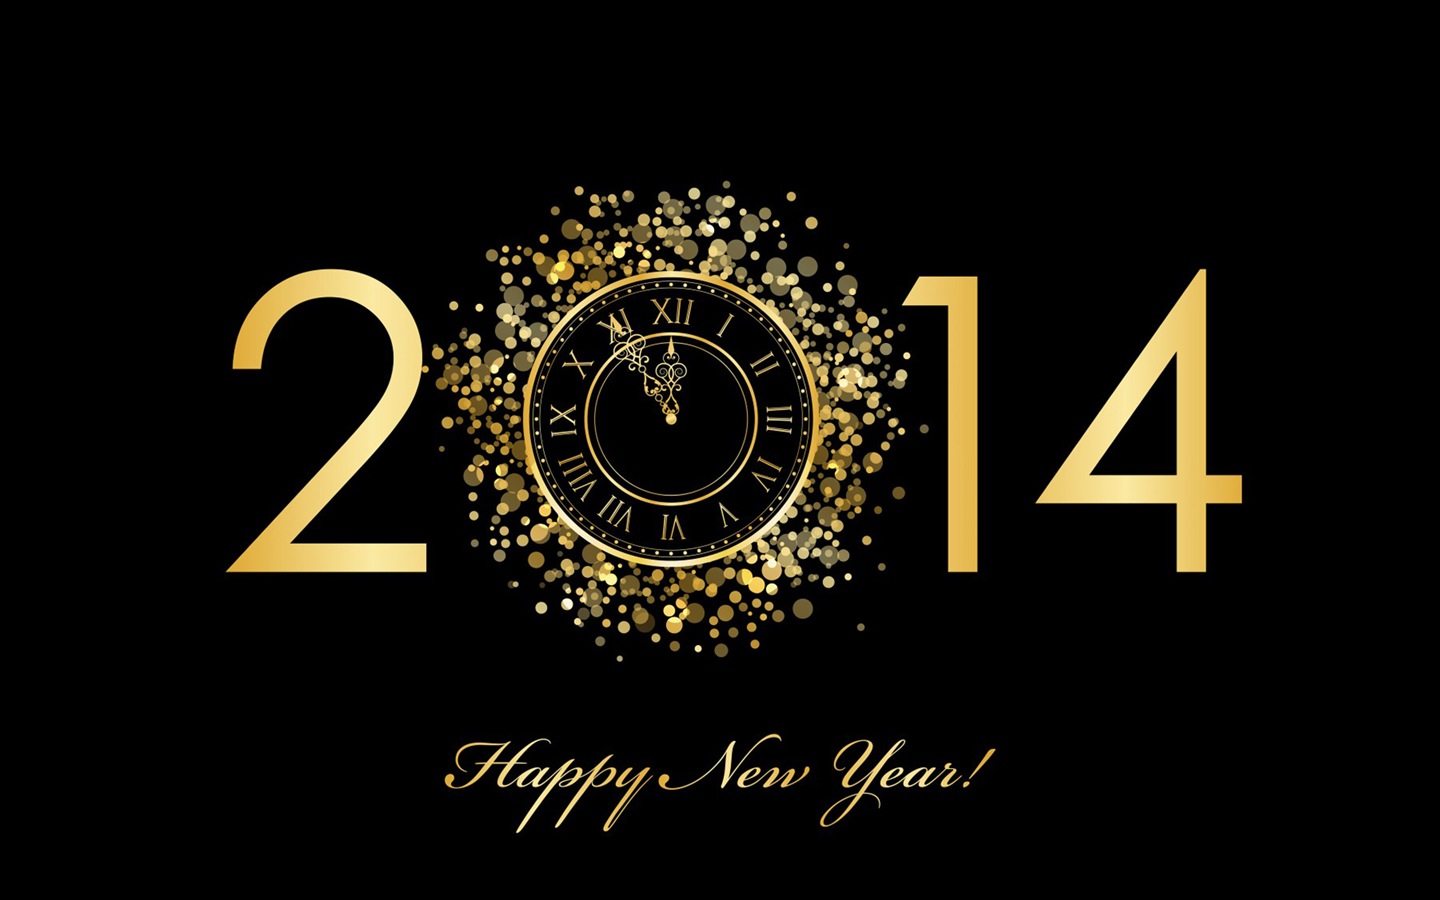 2014 New Year Theme HD Wallpapers (1) #1 - 1440x900